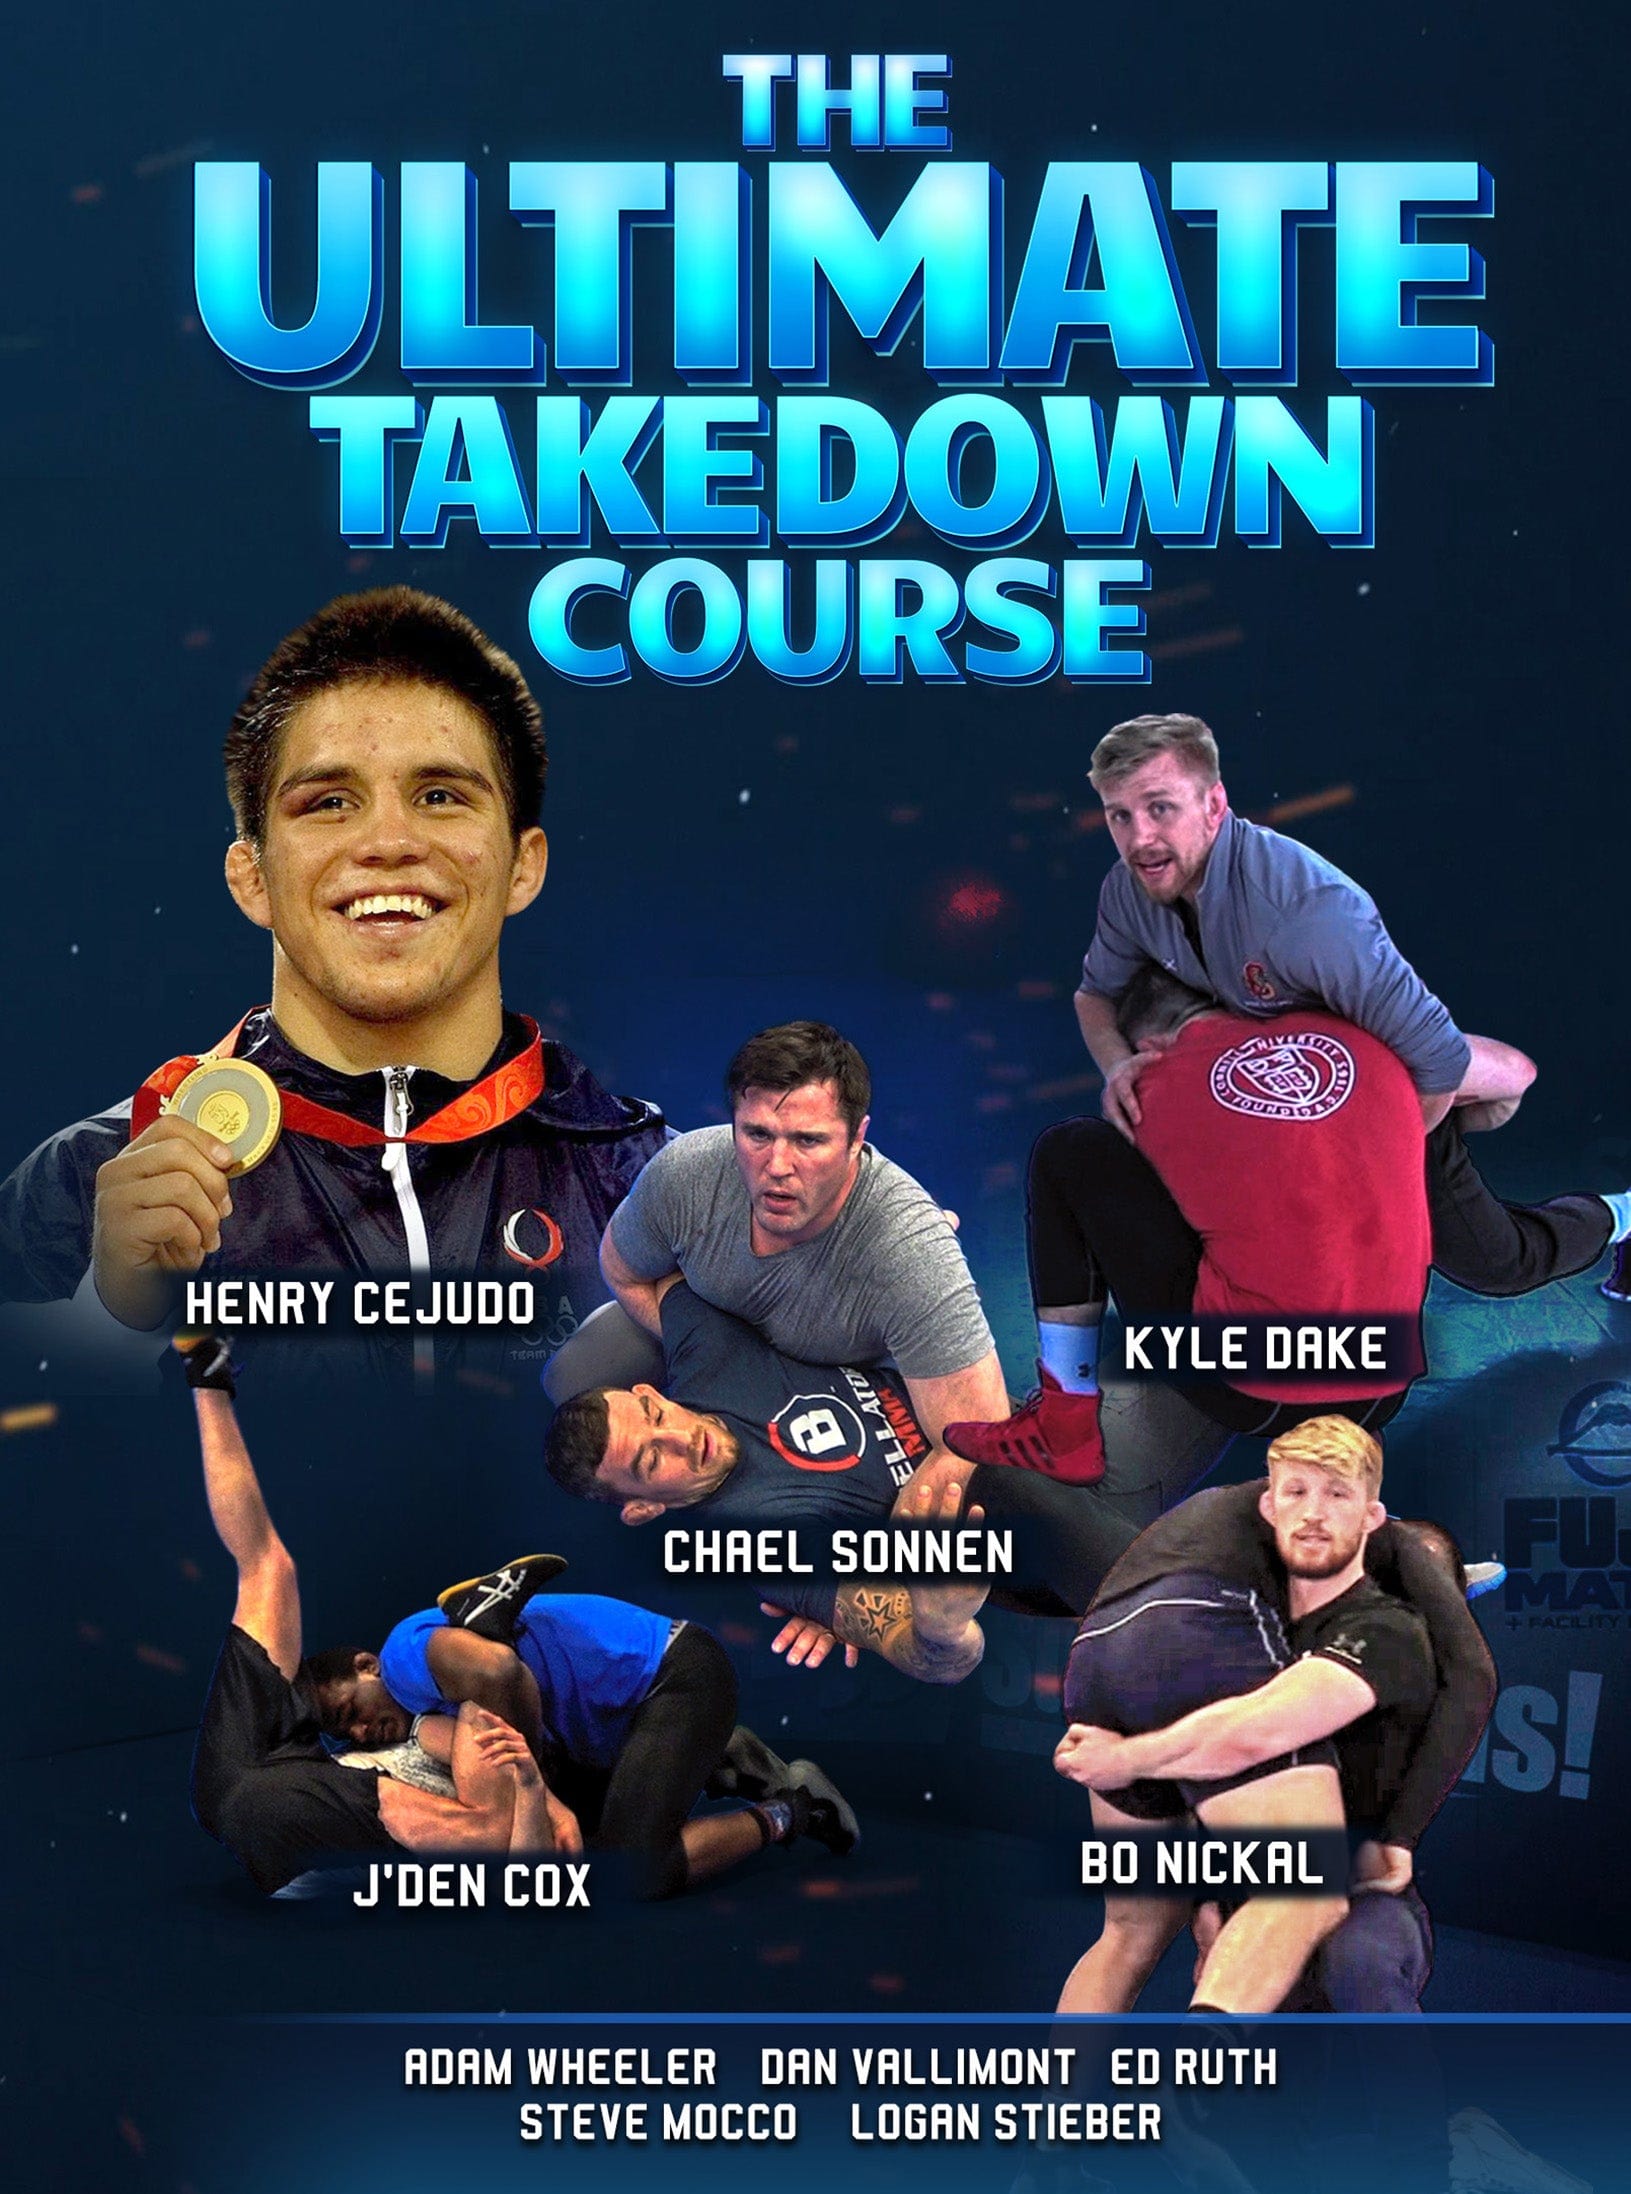 The Ultimate Takedown Course - Fanatic Wrestling